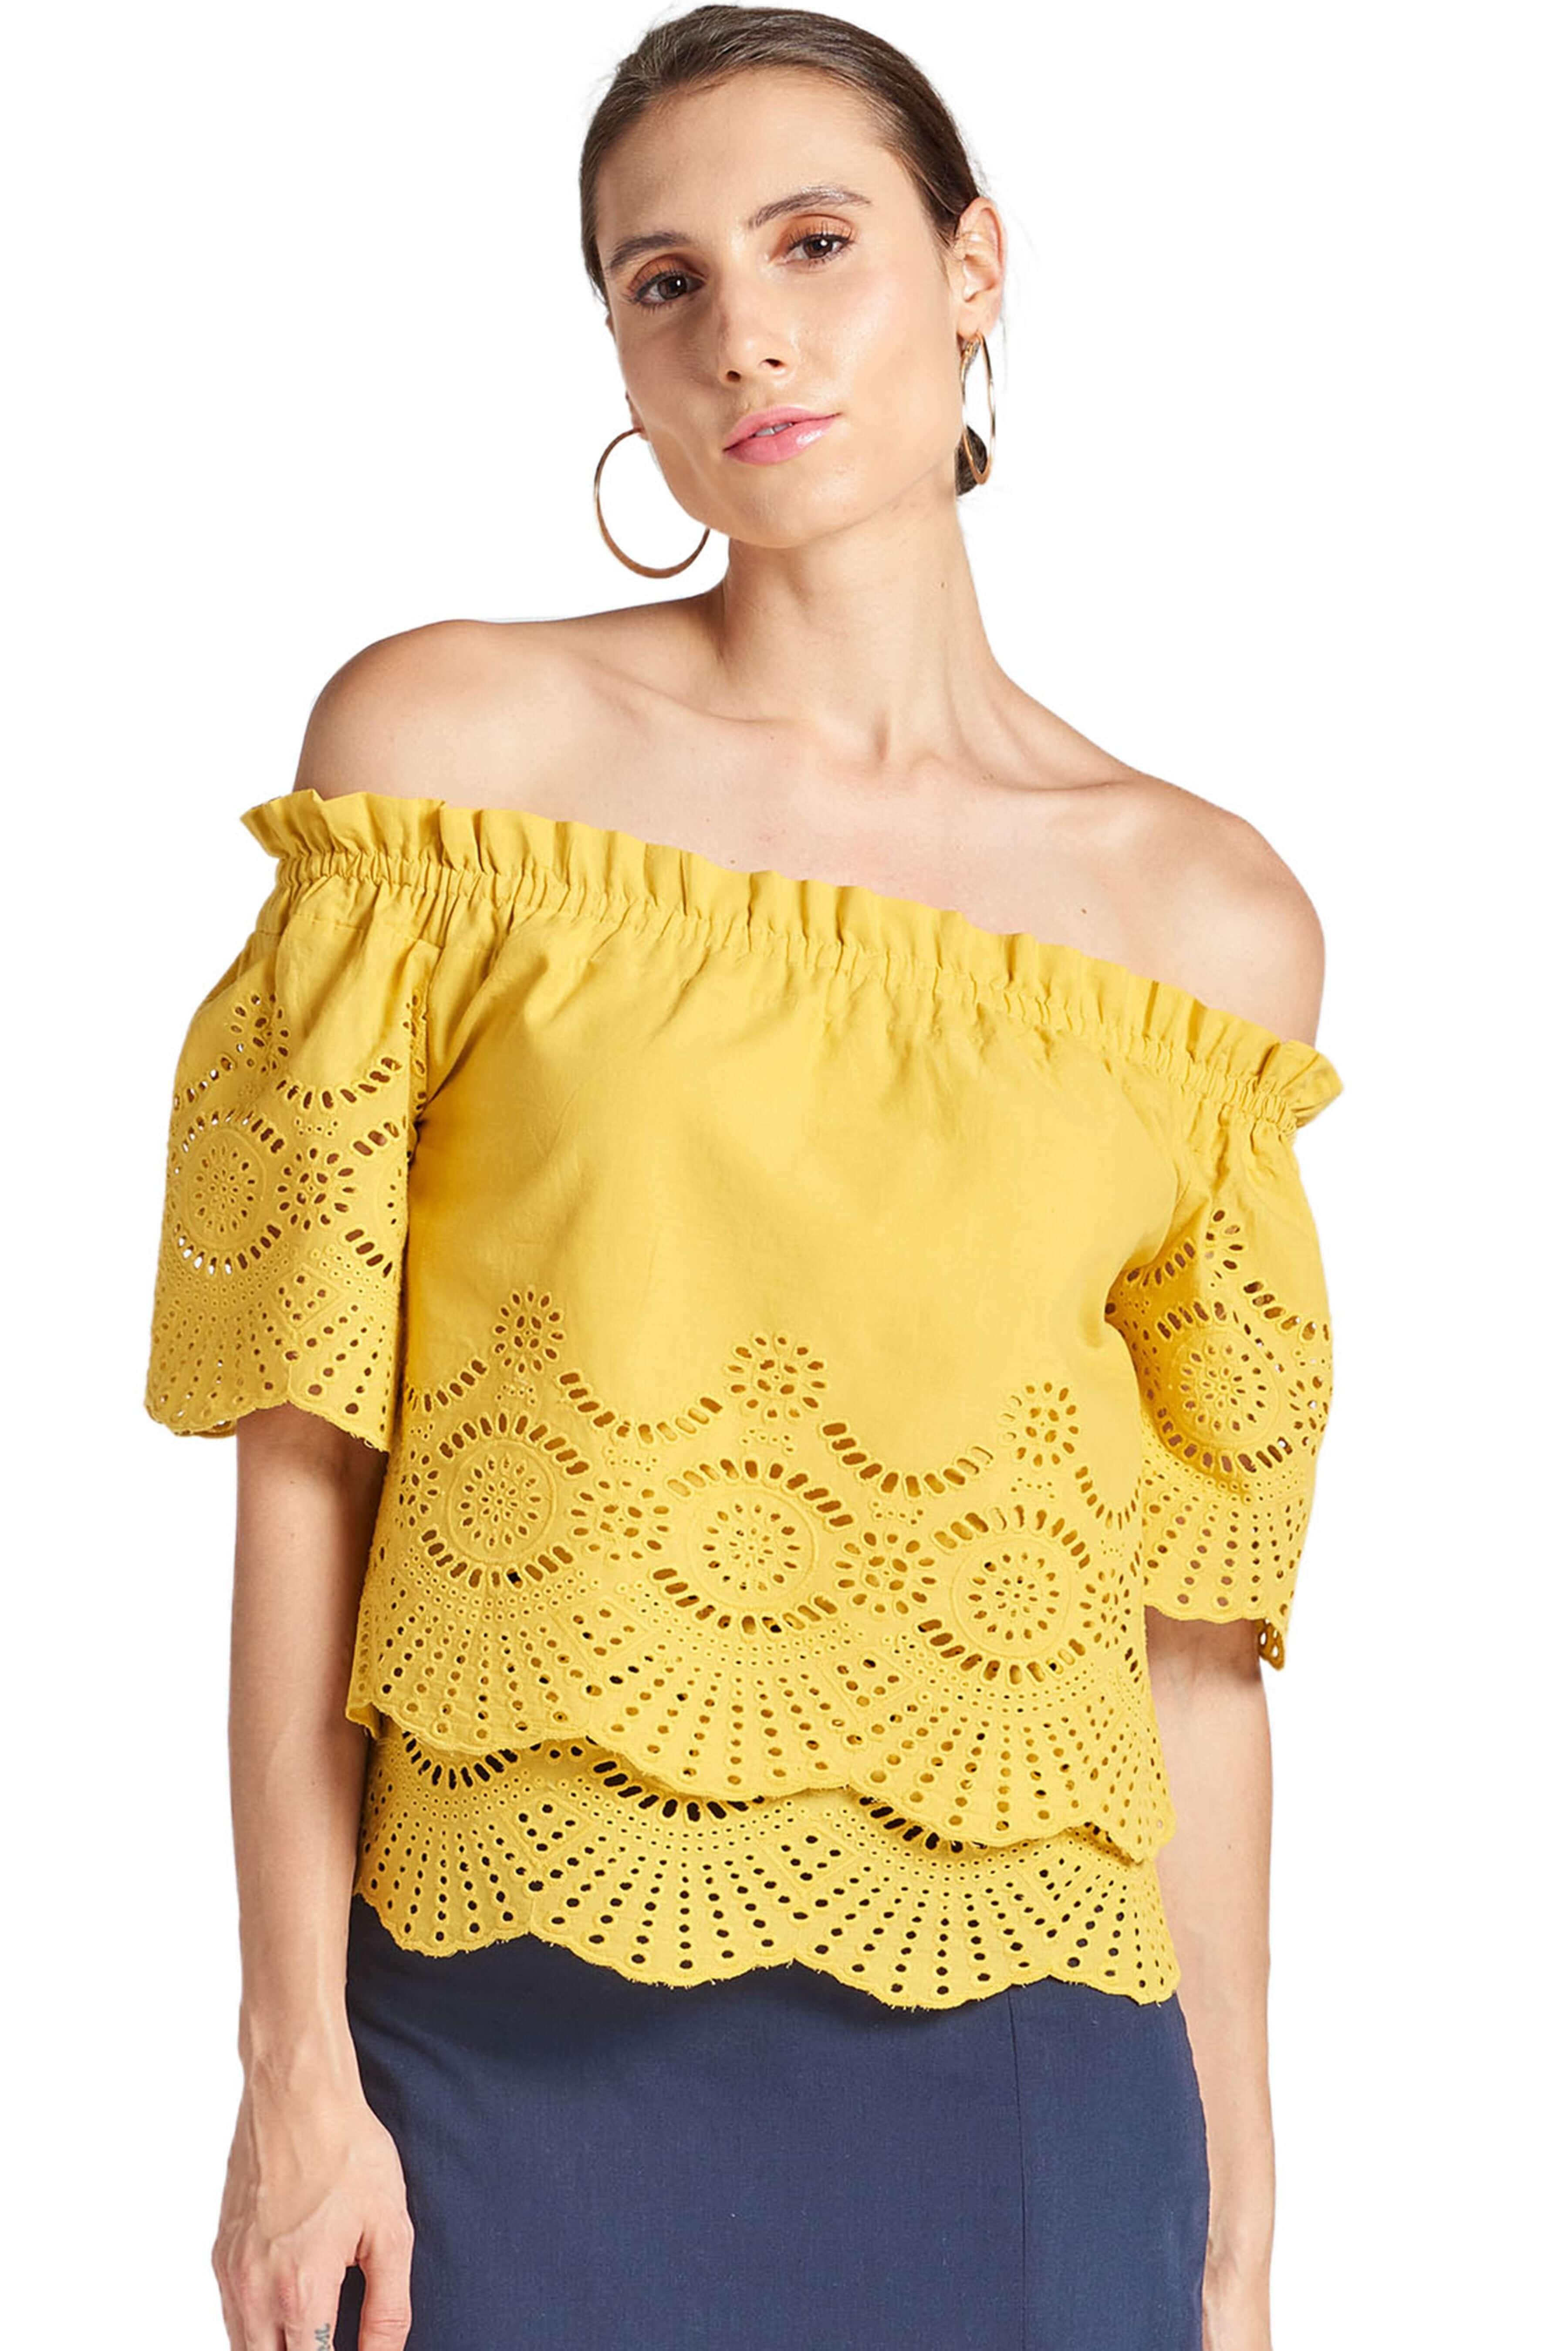 Model wearing yellow off the shoulder cotton eyelet top with scalloped short sleeves and scalloped bottom hems.